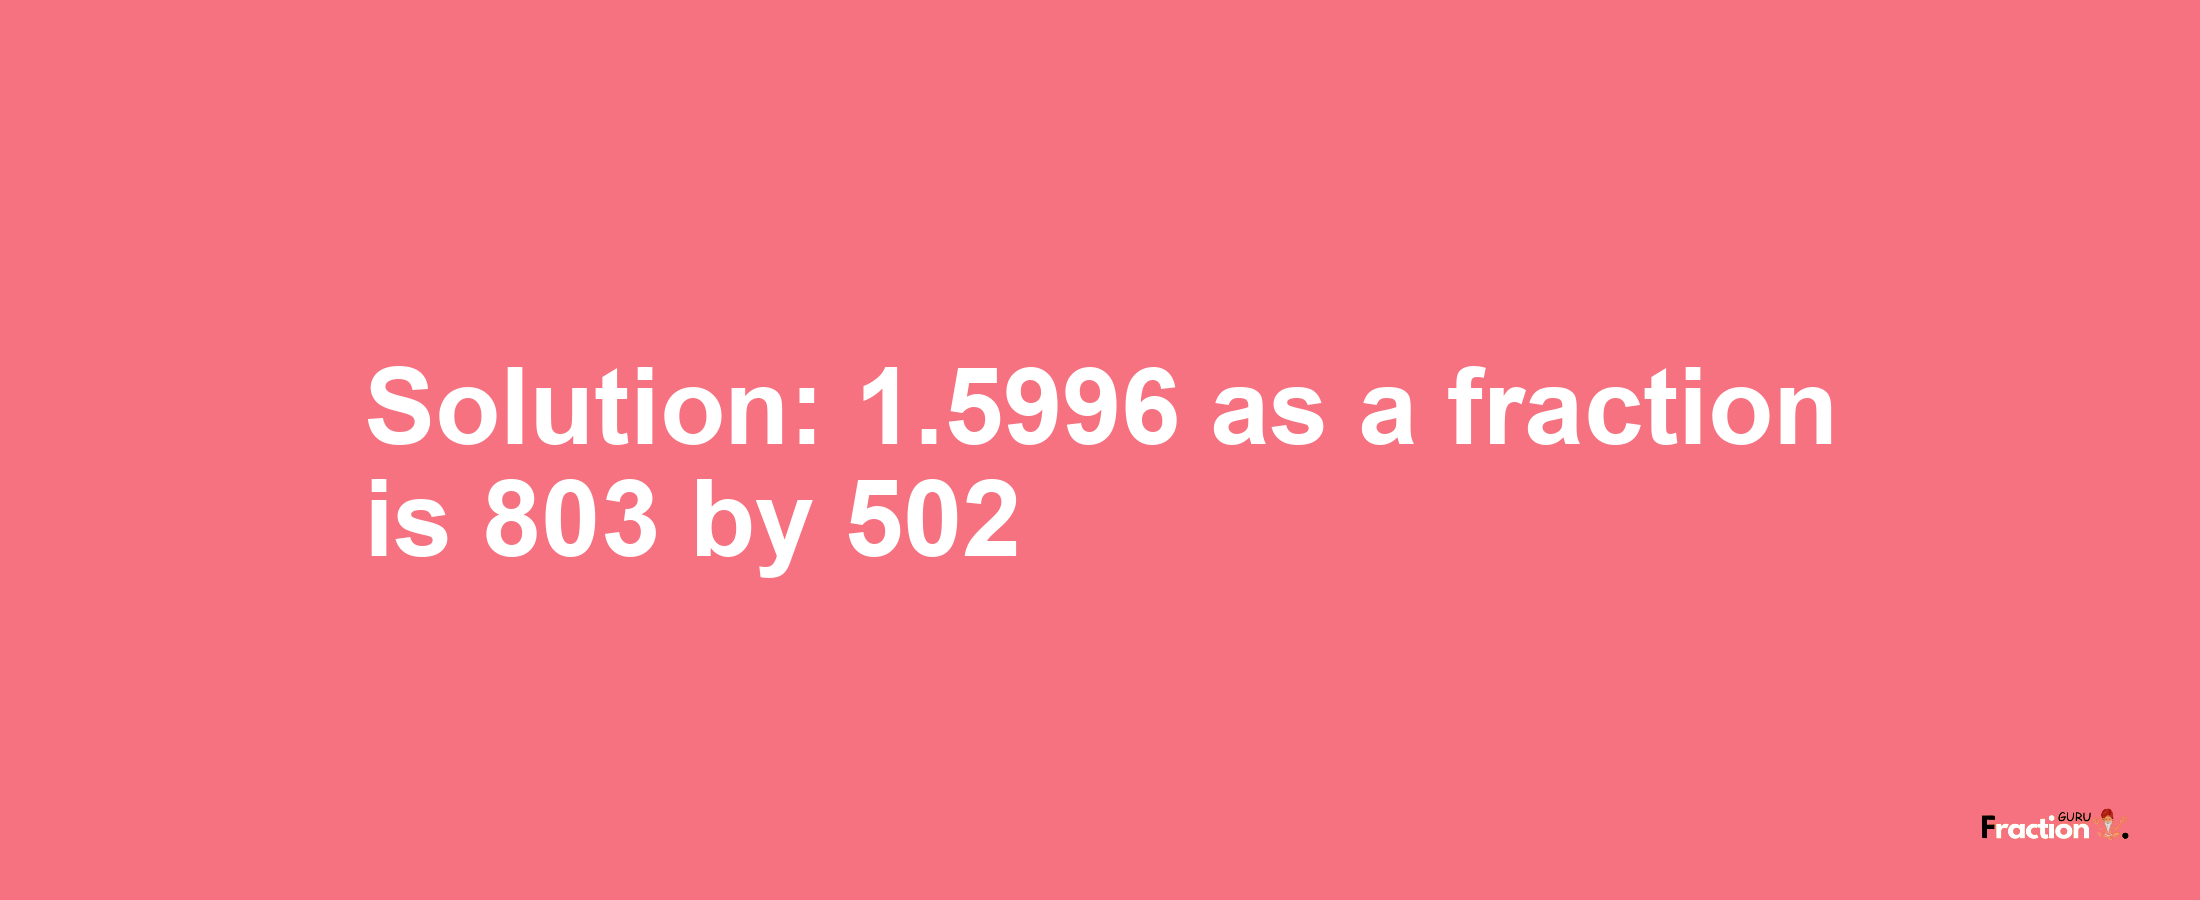 Solution:1.5996 as a fraction is 803/502